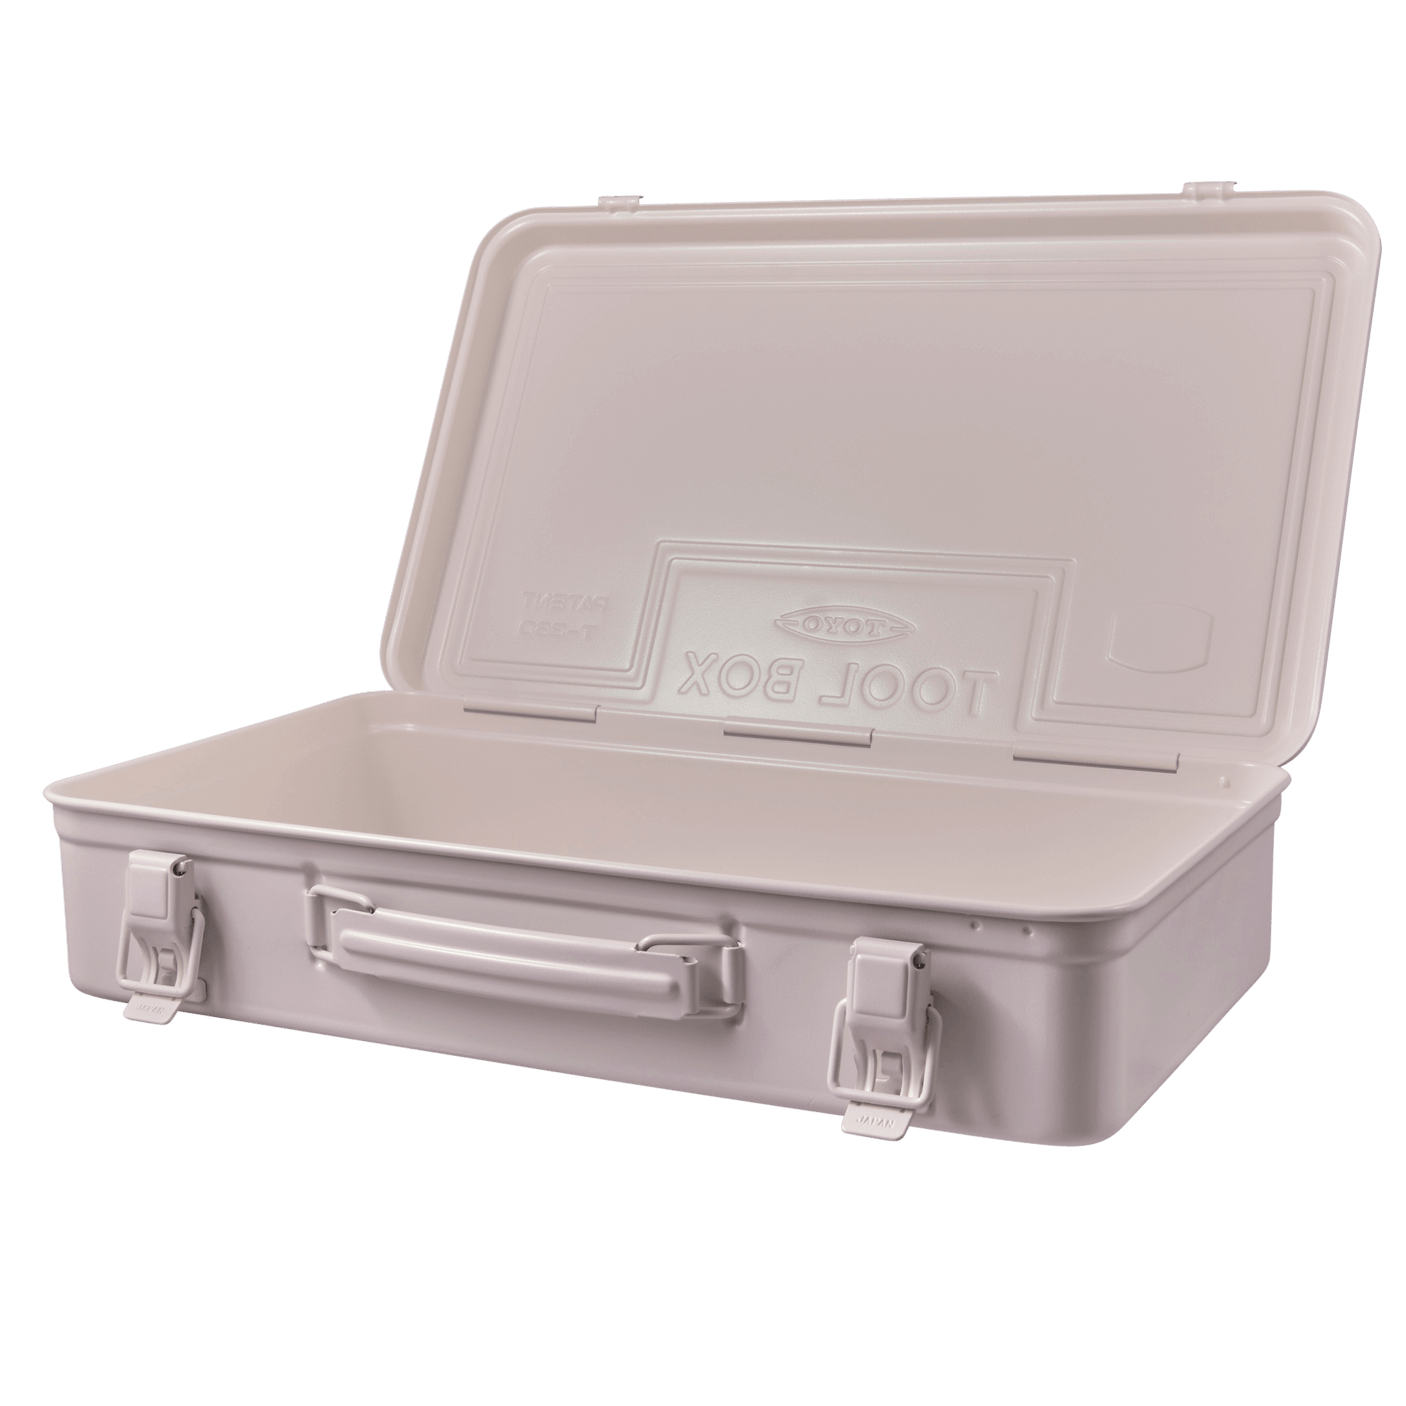 TOYO Trunk Shape Toolbox T-360 W (White) - Tool Bags Boxes and Rolls - Japanese Tools Australia